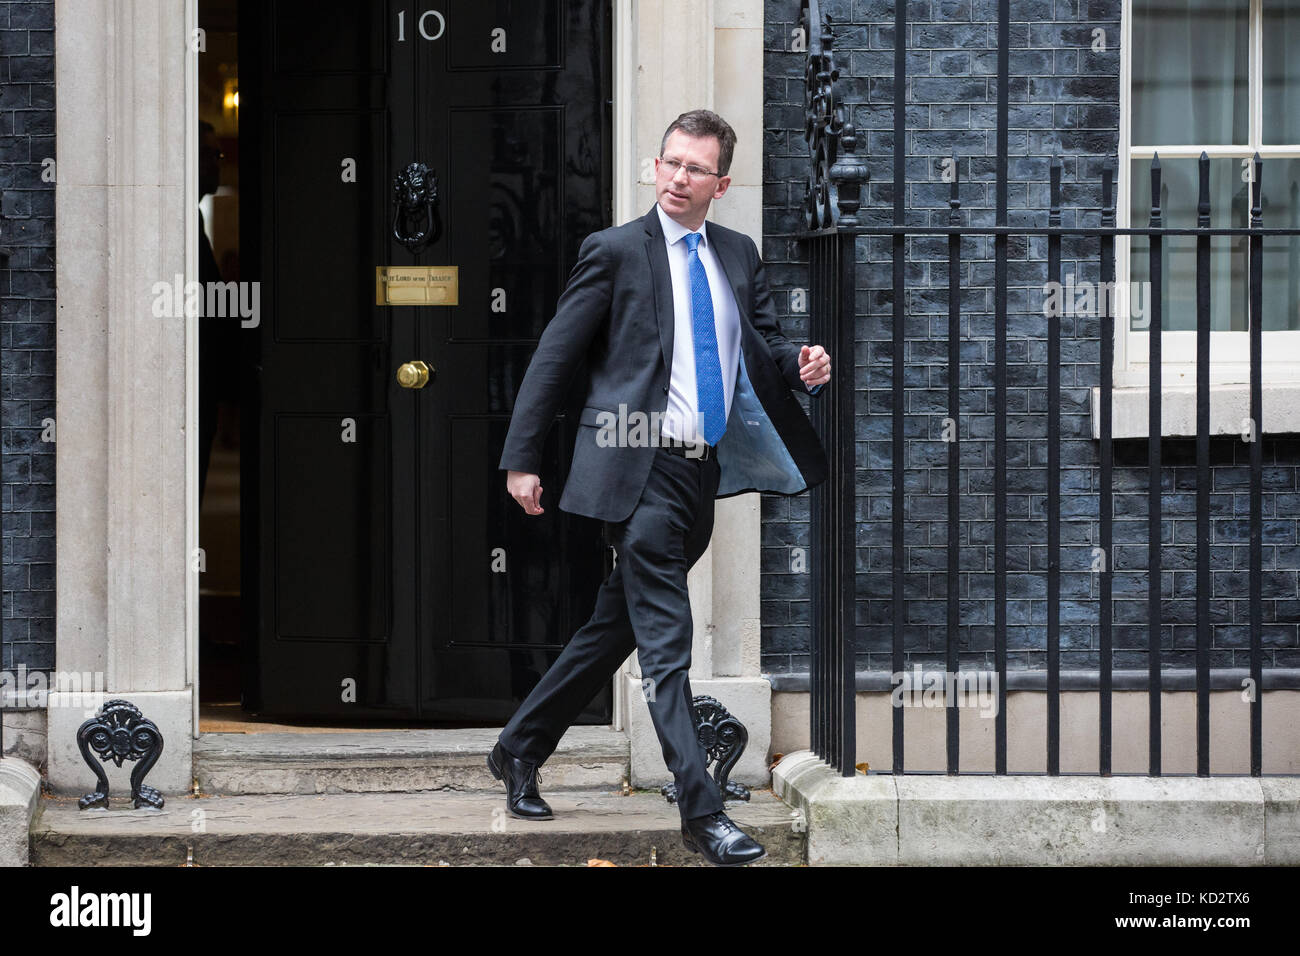 London, UK. 10th Oct, 2017. Jeremy Wright QC MP, Attorney General, leaves 10 Downing Street following a Cabinet meeting. Credit: Mark Kerrison/Alamy Live News Stock Photo